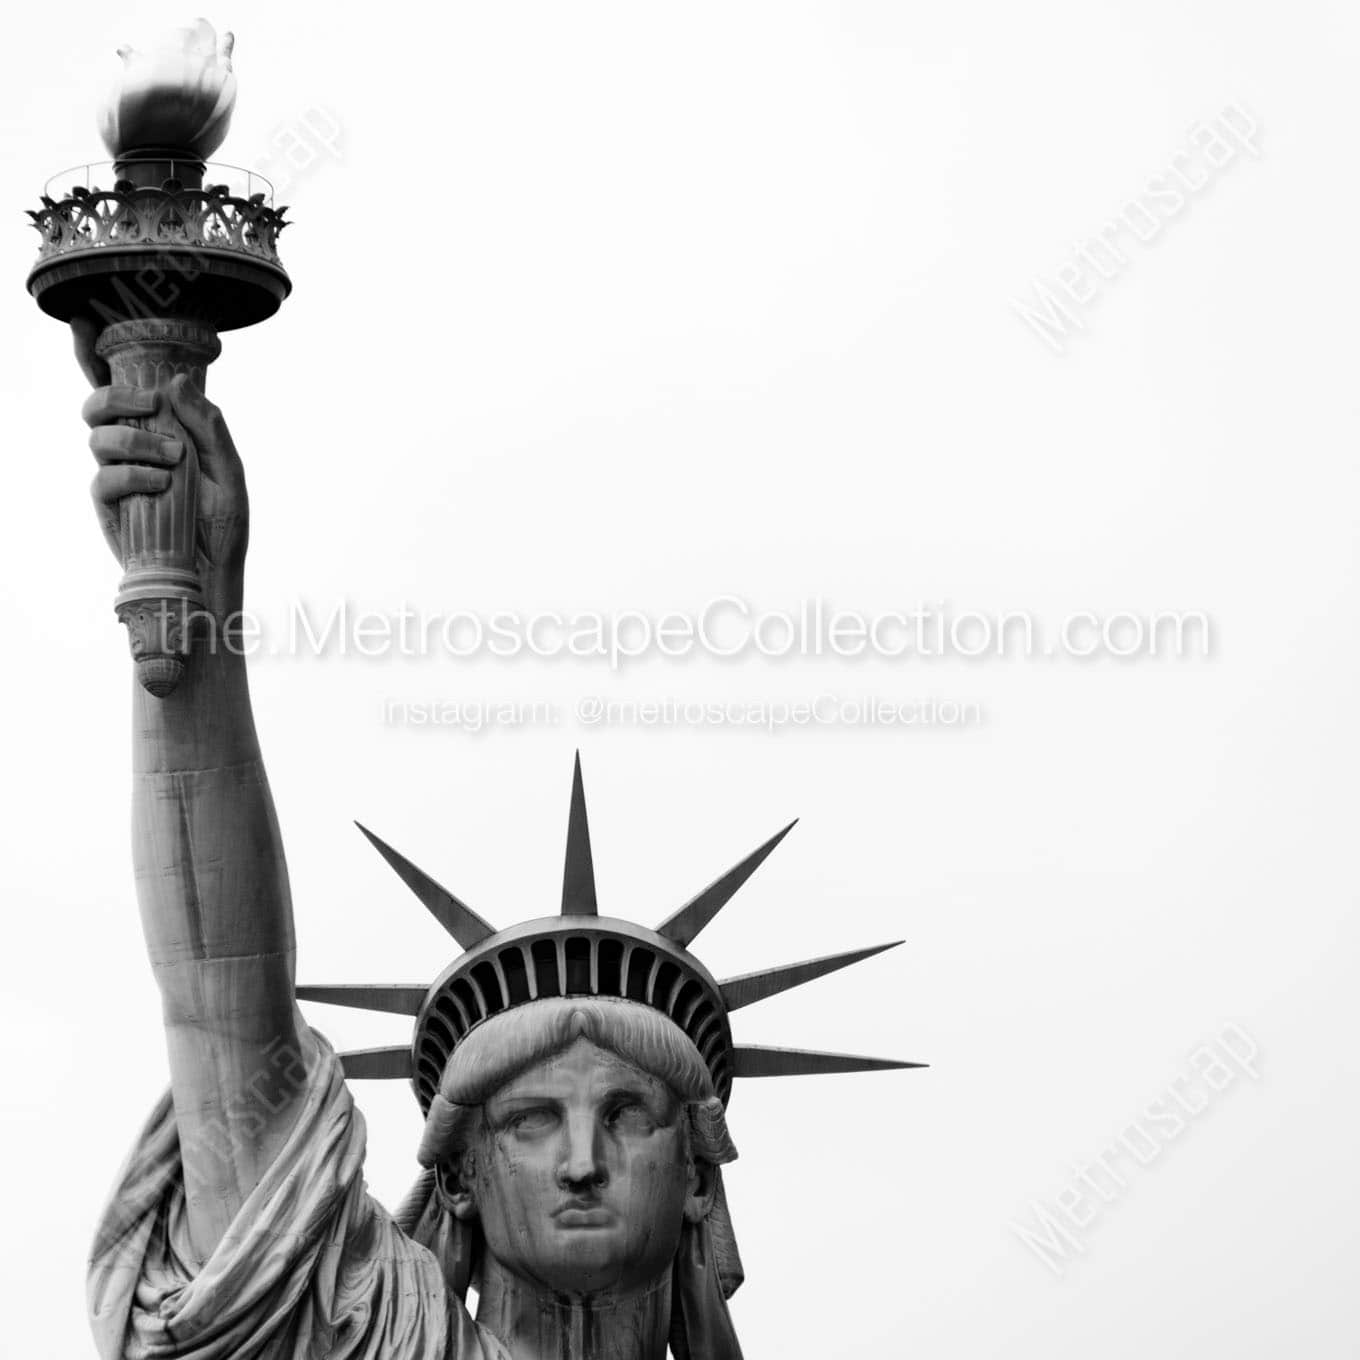 torch of statue of liberty Black & White Office Art